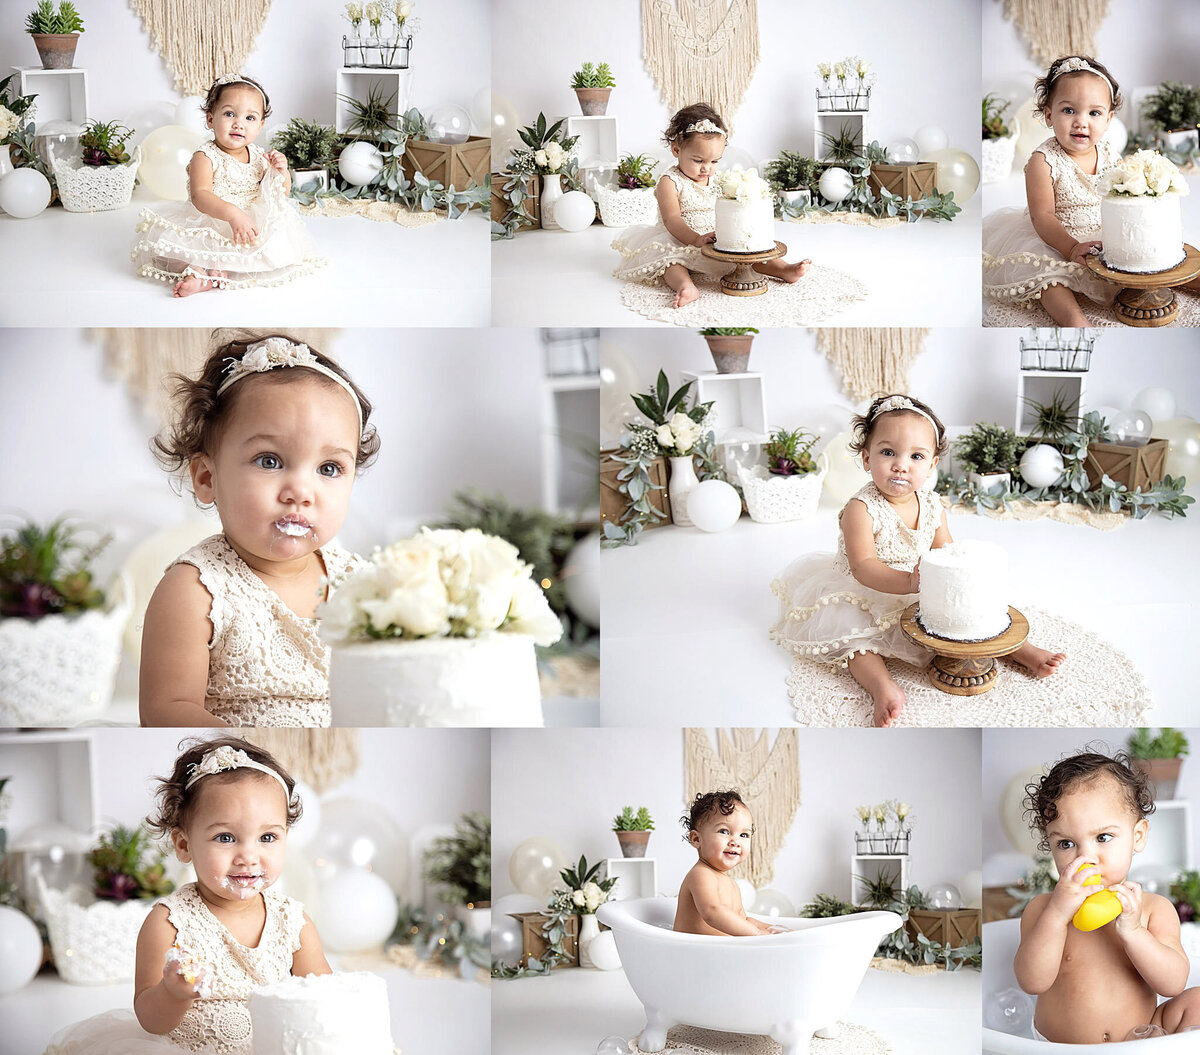 Burleson-Cakesmash-Photography-Session-Mansfield-Photographer-Arlington-Studio-Newborn-Pictures-One-Year-Old-Cake-Smash-Bubble-Splash-SimplyBaby-Kimberly-Fain-Dallas-Ft-Worth-Fort-Texas